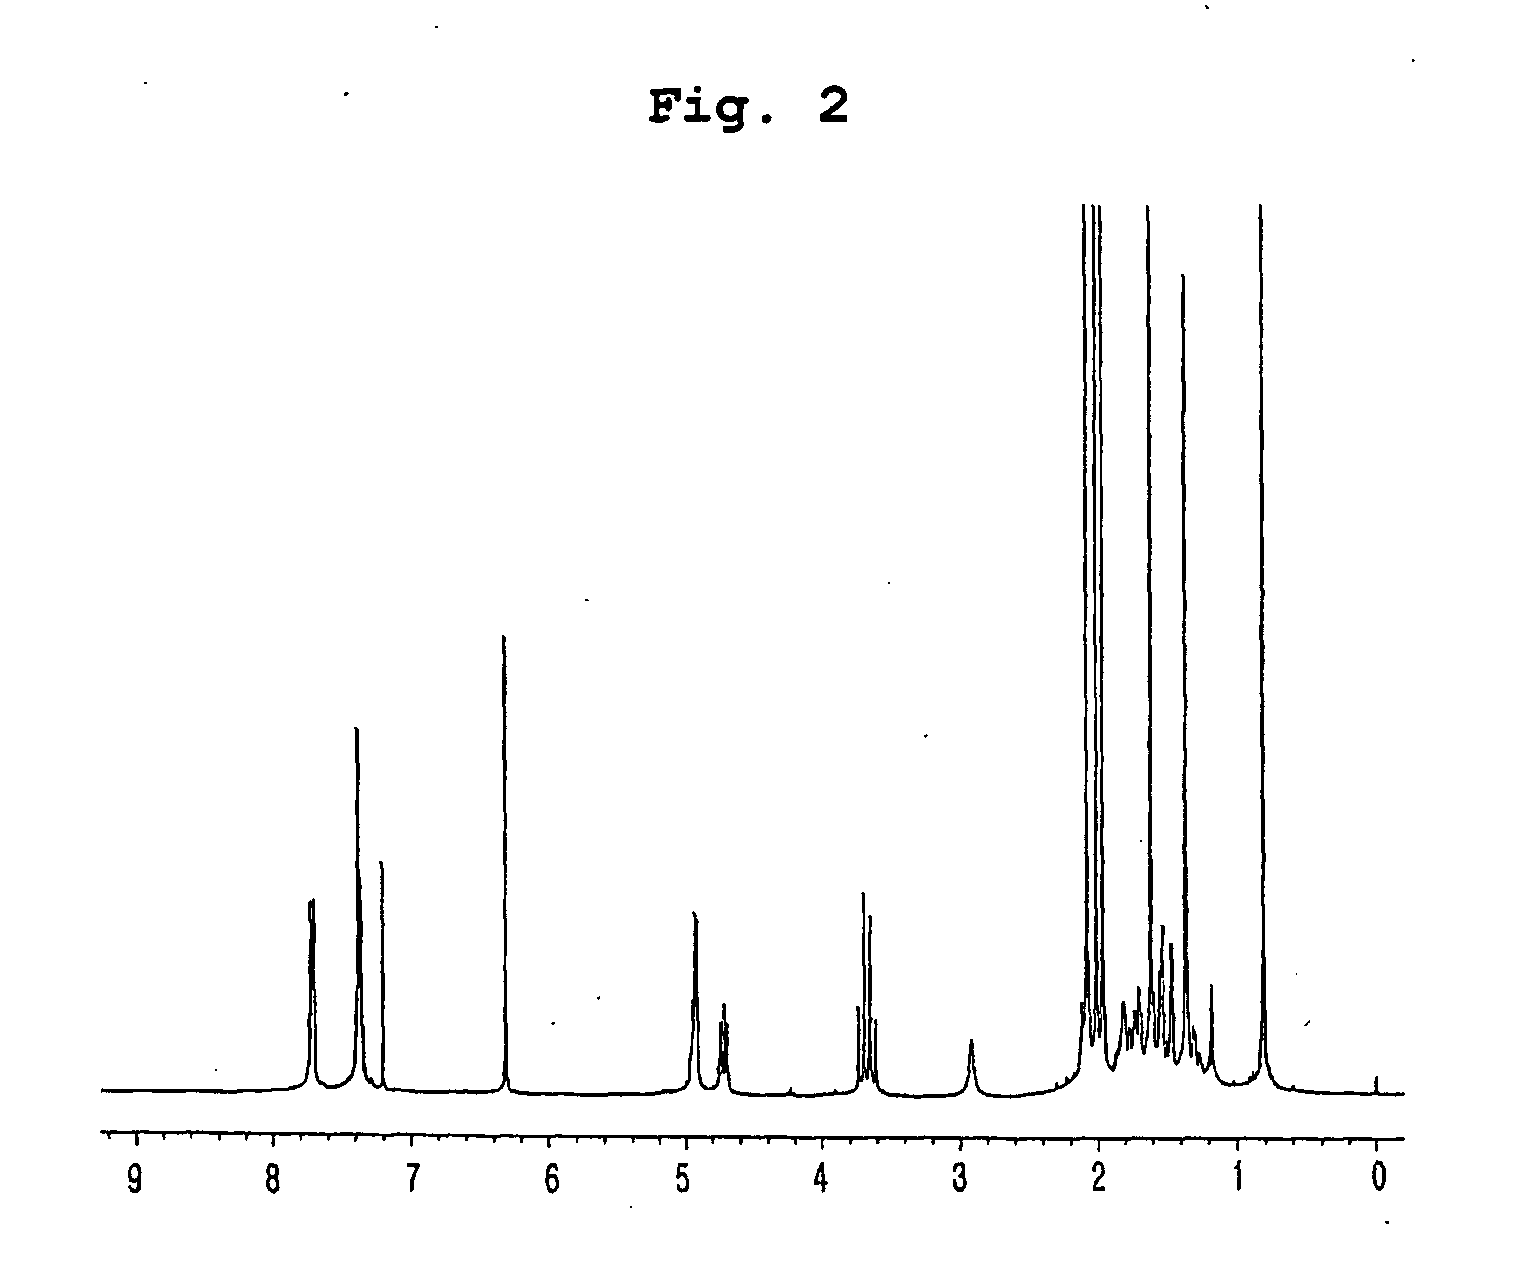 Insecticidal compositions comprising compounds having inhibitory activity versus acyl coa: cholesterol acyltransferase or salts thereof as effective ingredients